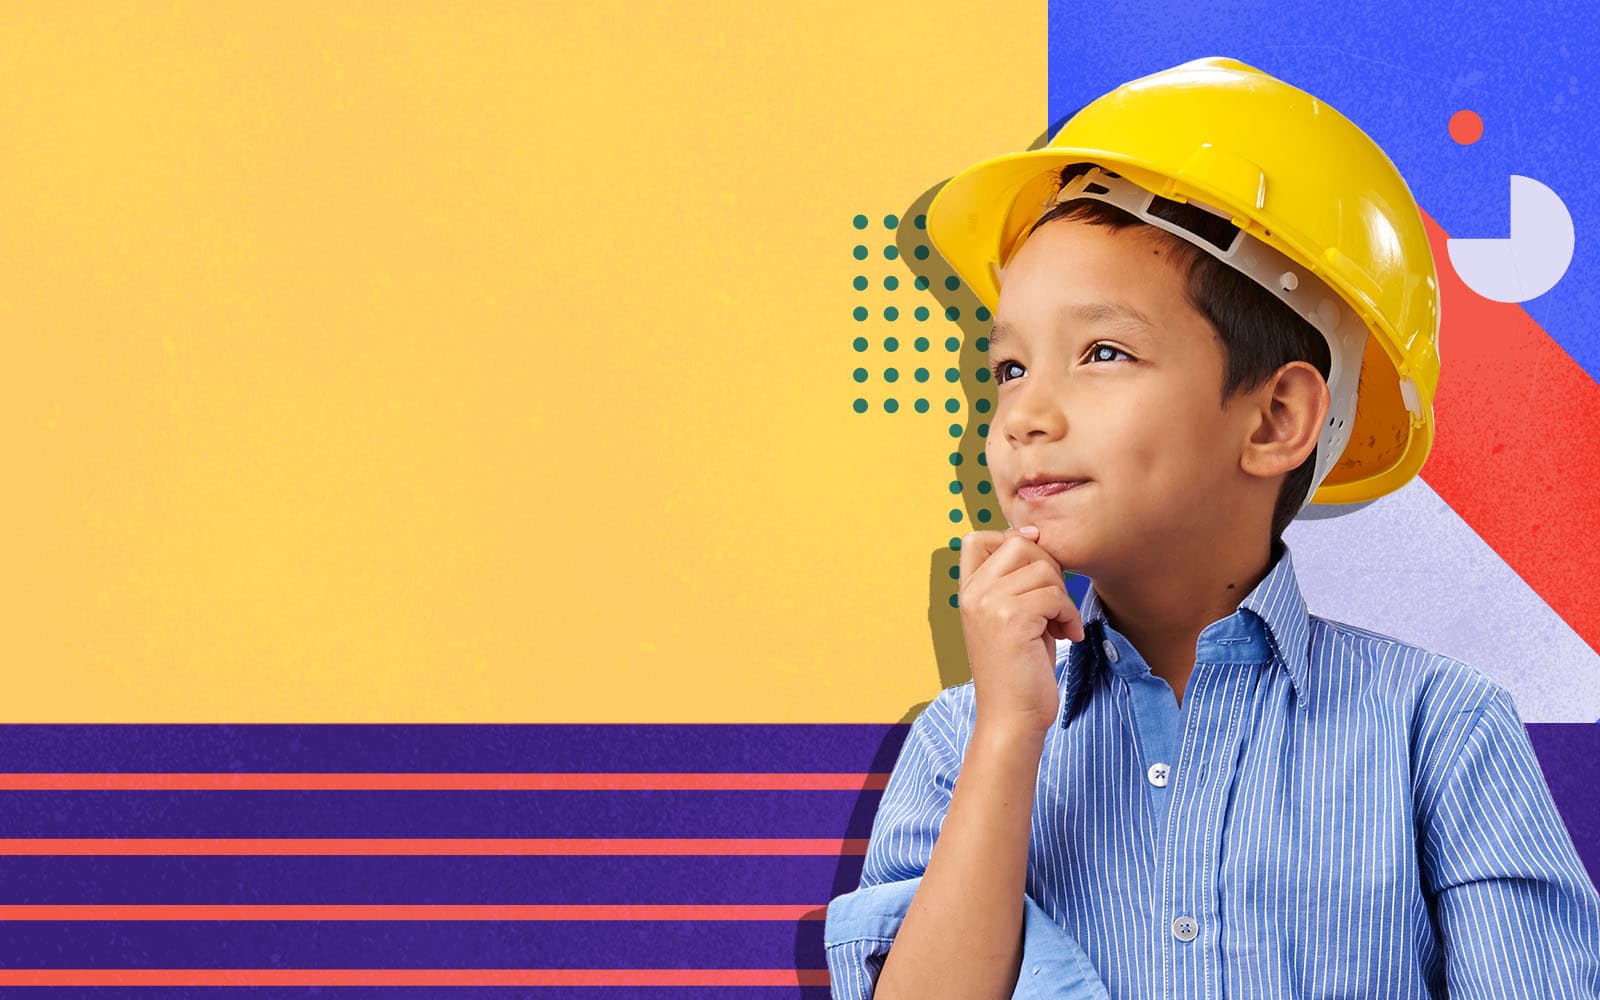 Child wearing yellow construction helmet looking off into the distance